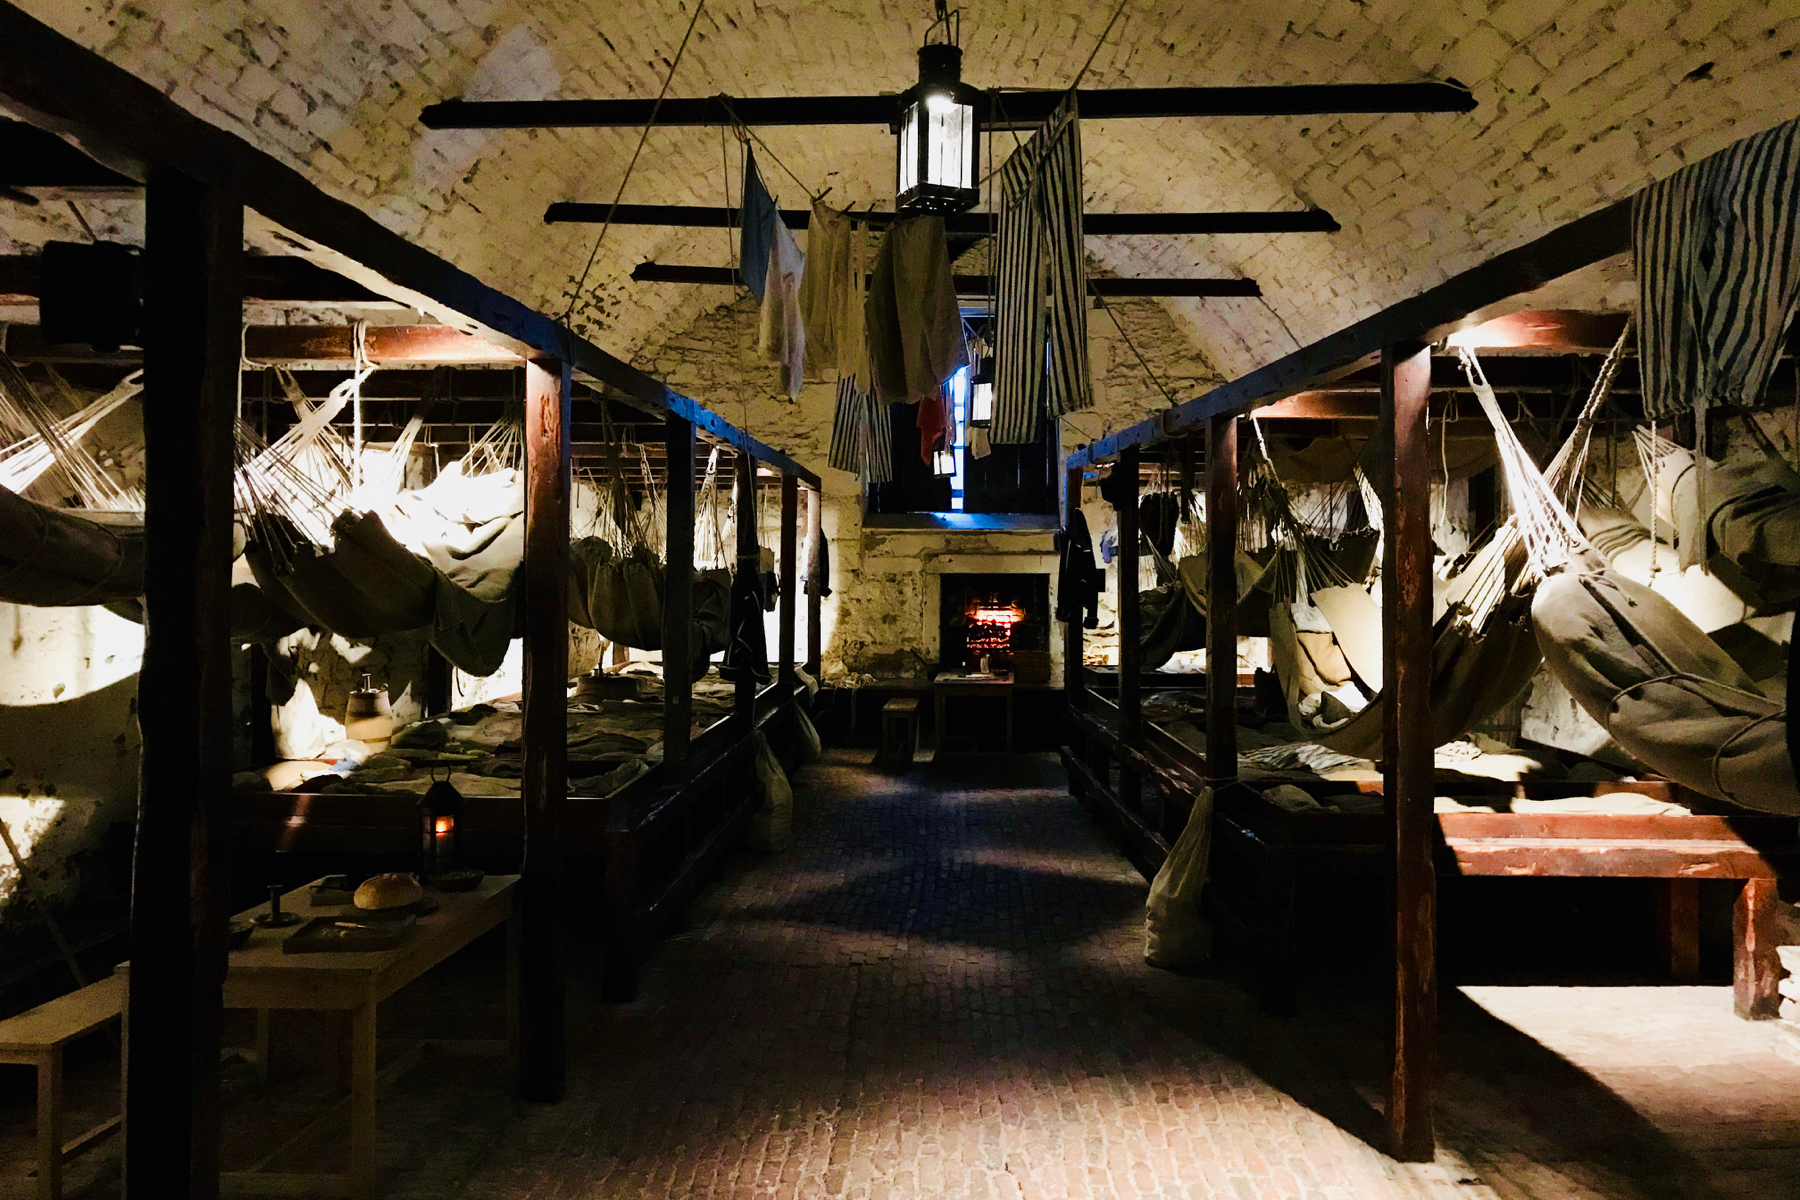 A photo of the sleeping conditions which prisoners of war held at Edinburgh Castle would have endured